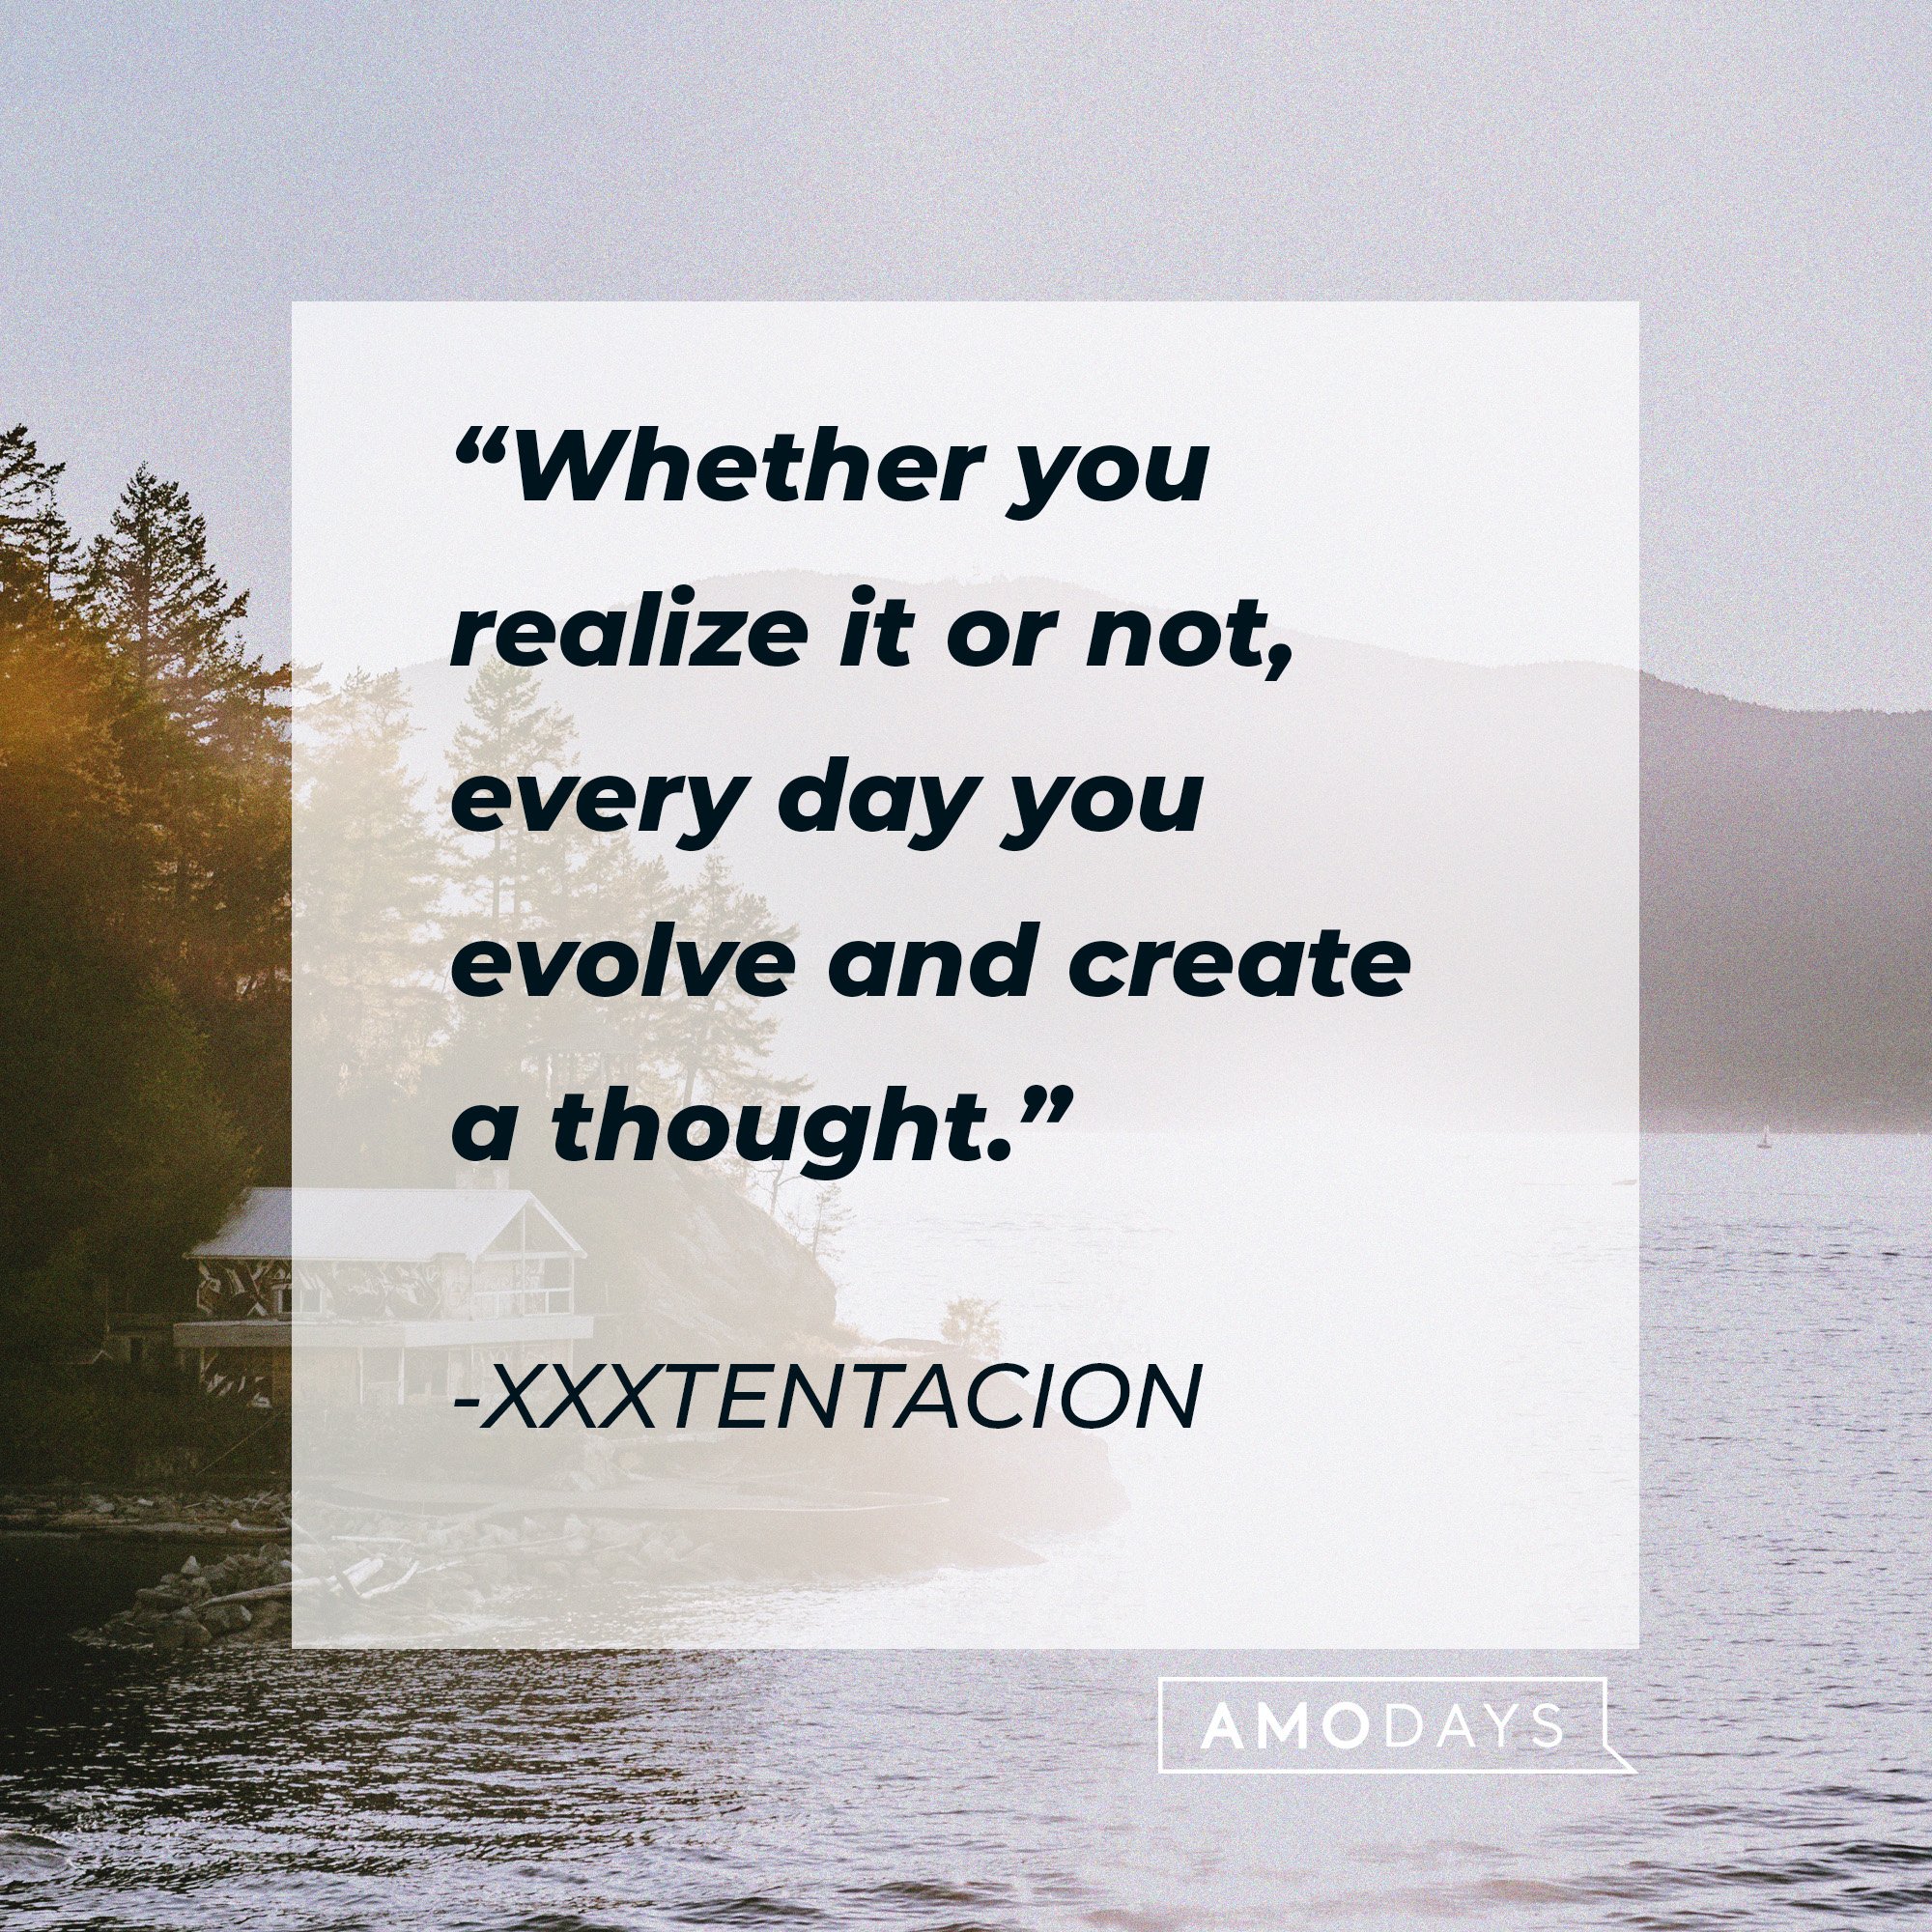 Xxxtentacion’s quote: “Whether you realize it or not, every day you evolve and create a thought.” | Image: AmoDays